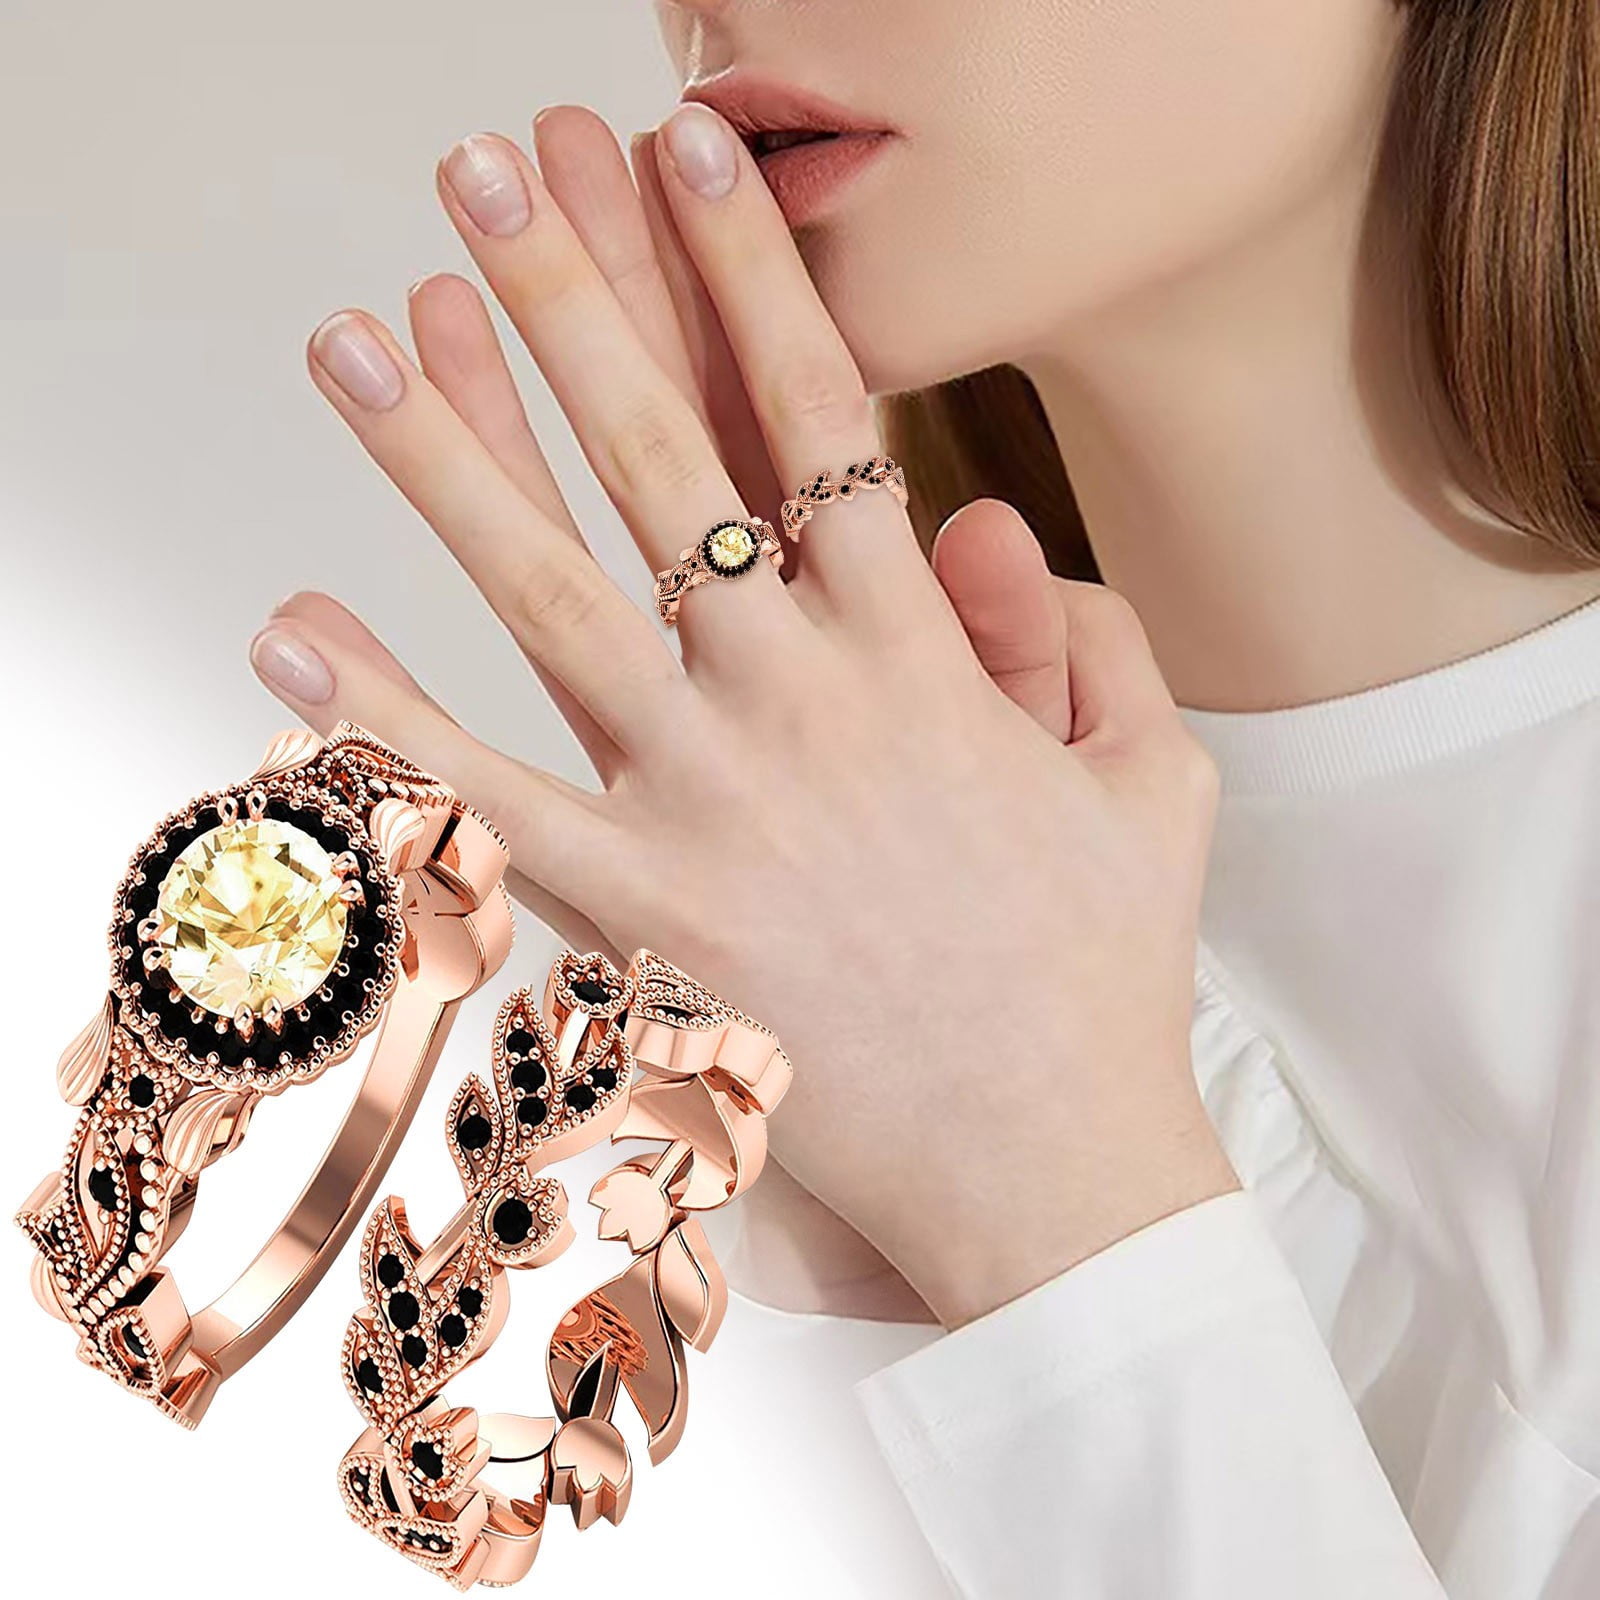 Jewelry For Women Rings Diamond Double Ring Set For Women Fashion Jewelry Popular Accessories Cute Ring Pack Trendy Jewelry Gift for Her 8a815e9f ee7c 411a acee c26e67196e17.02df5e5545e9b48035f3a1a463fcc830